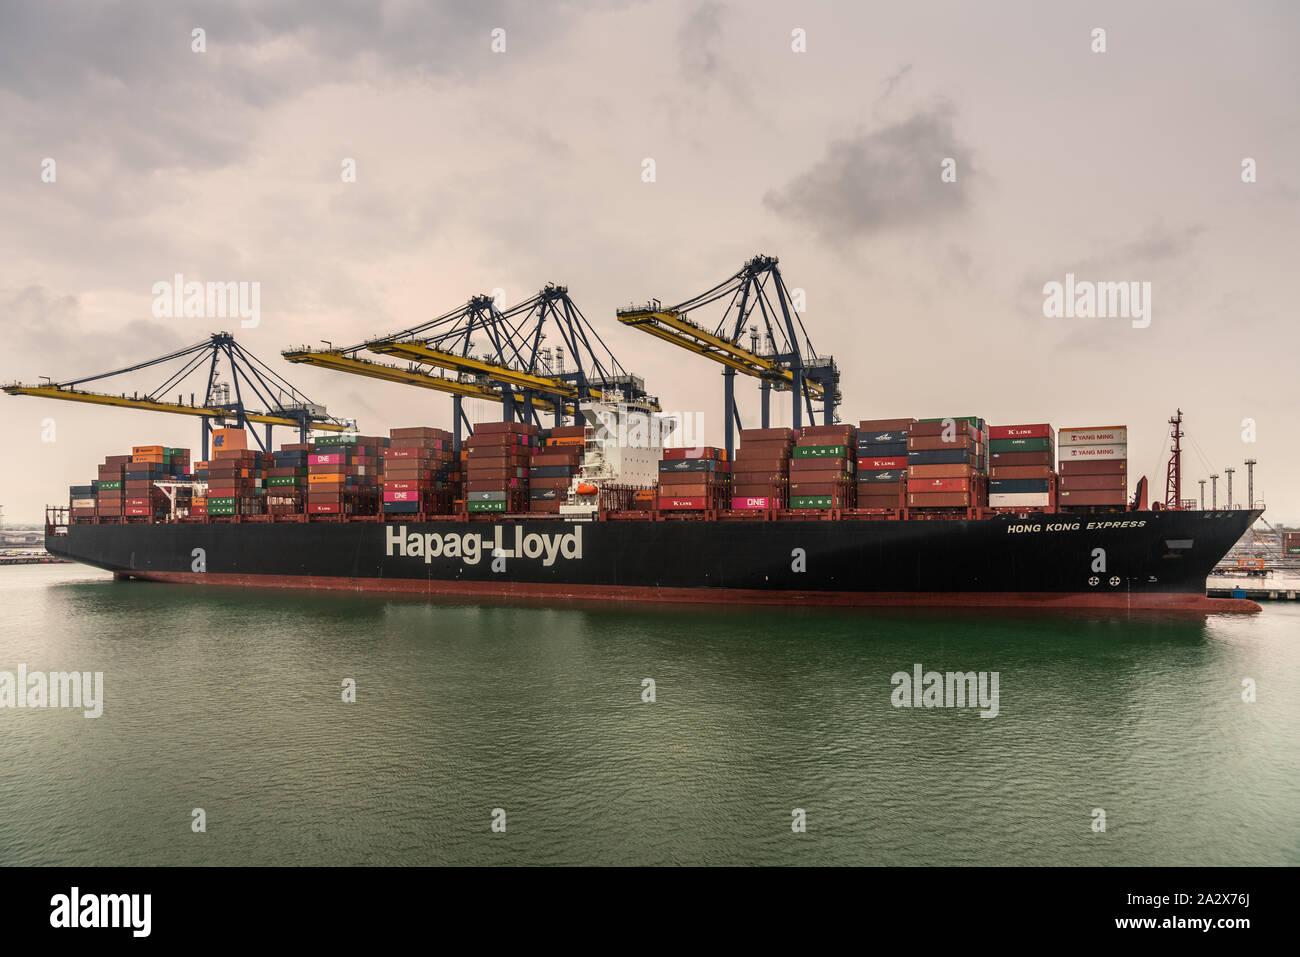 Laem Chabang, Thailand - March 16, 2019: Container port and terminal and Hapag Lloyd ship under gray sky. Four yellow cranes loading and unloading it. Stock Photo